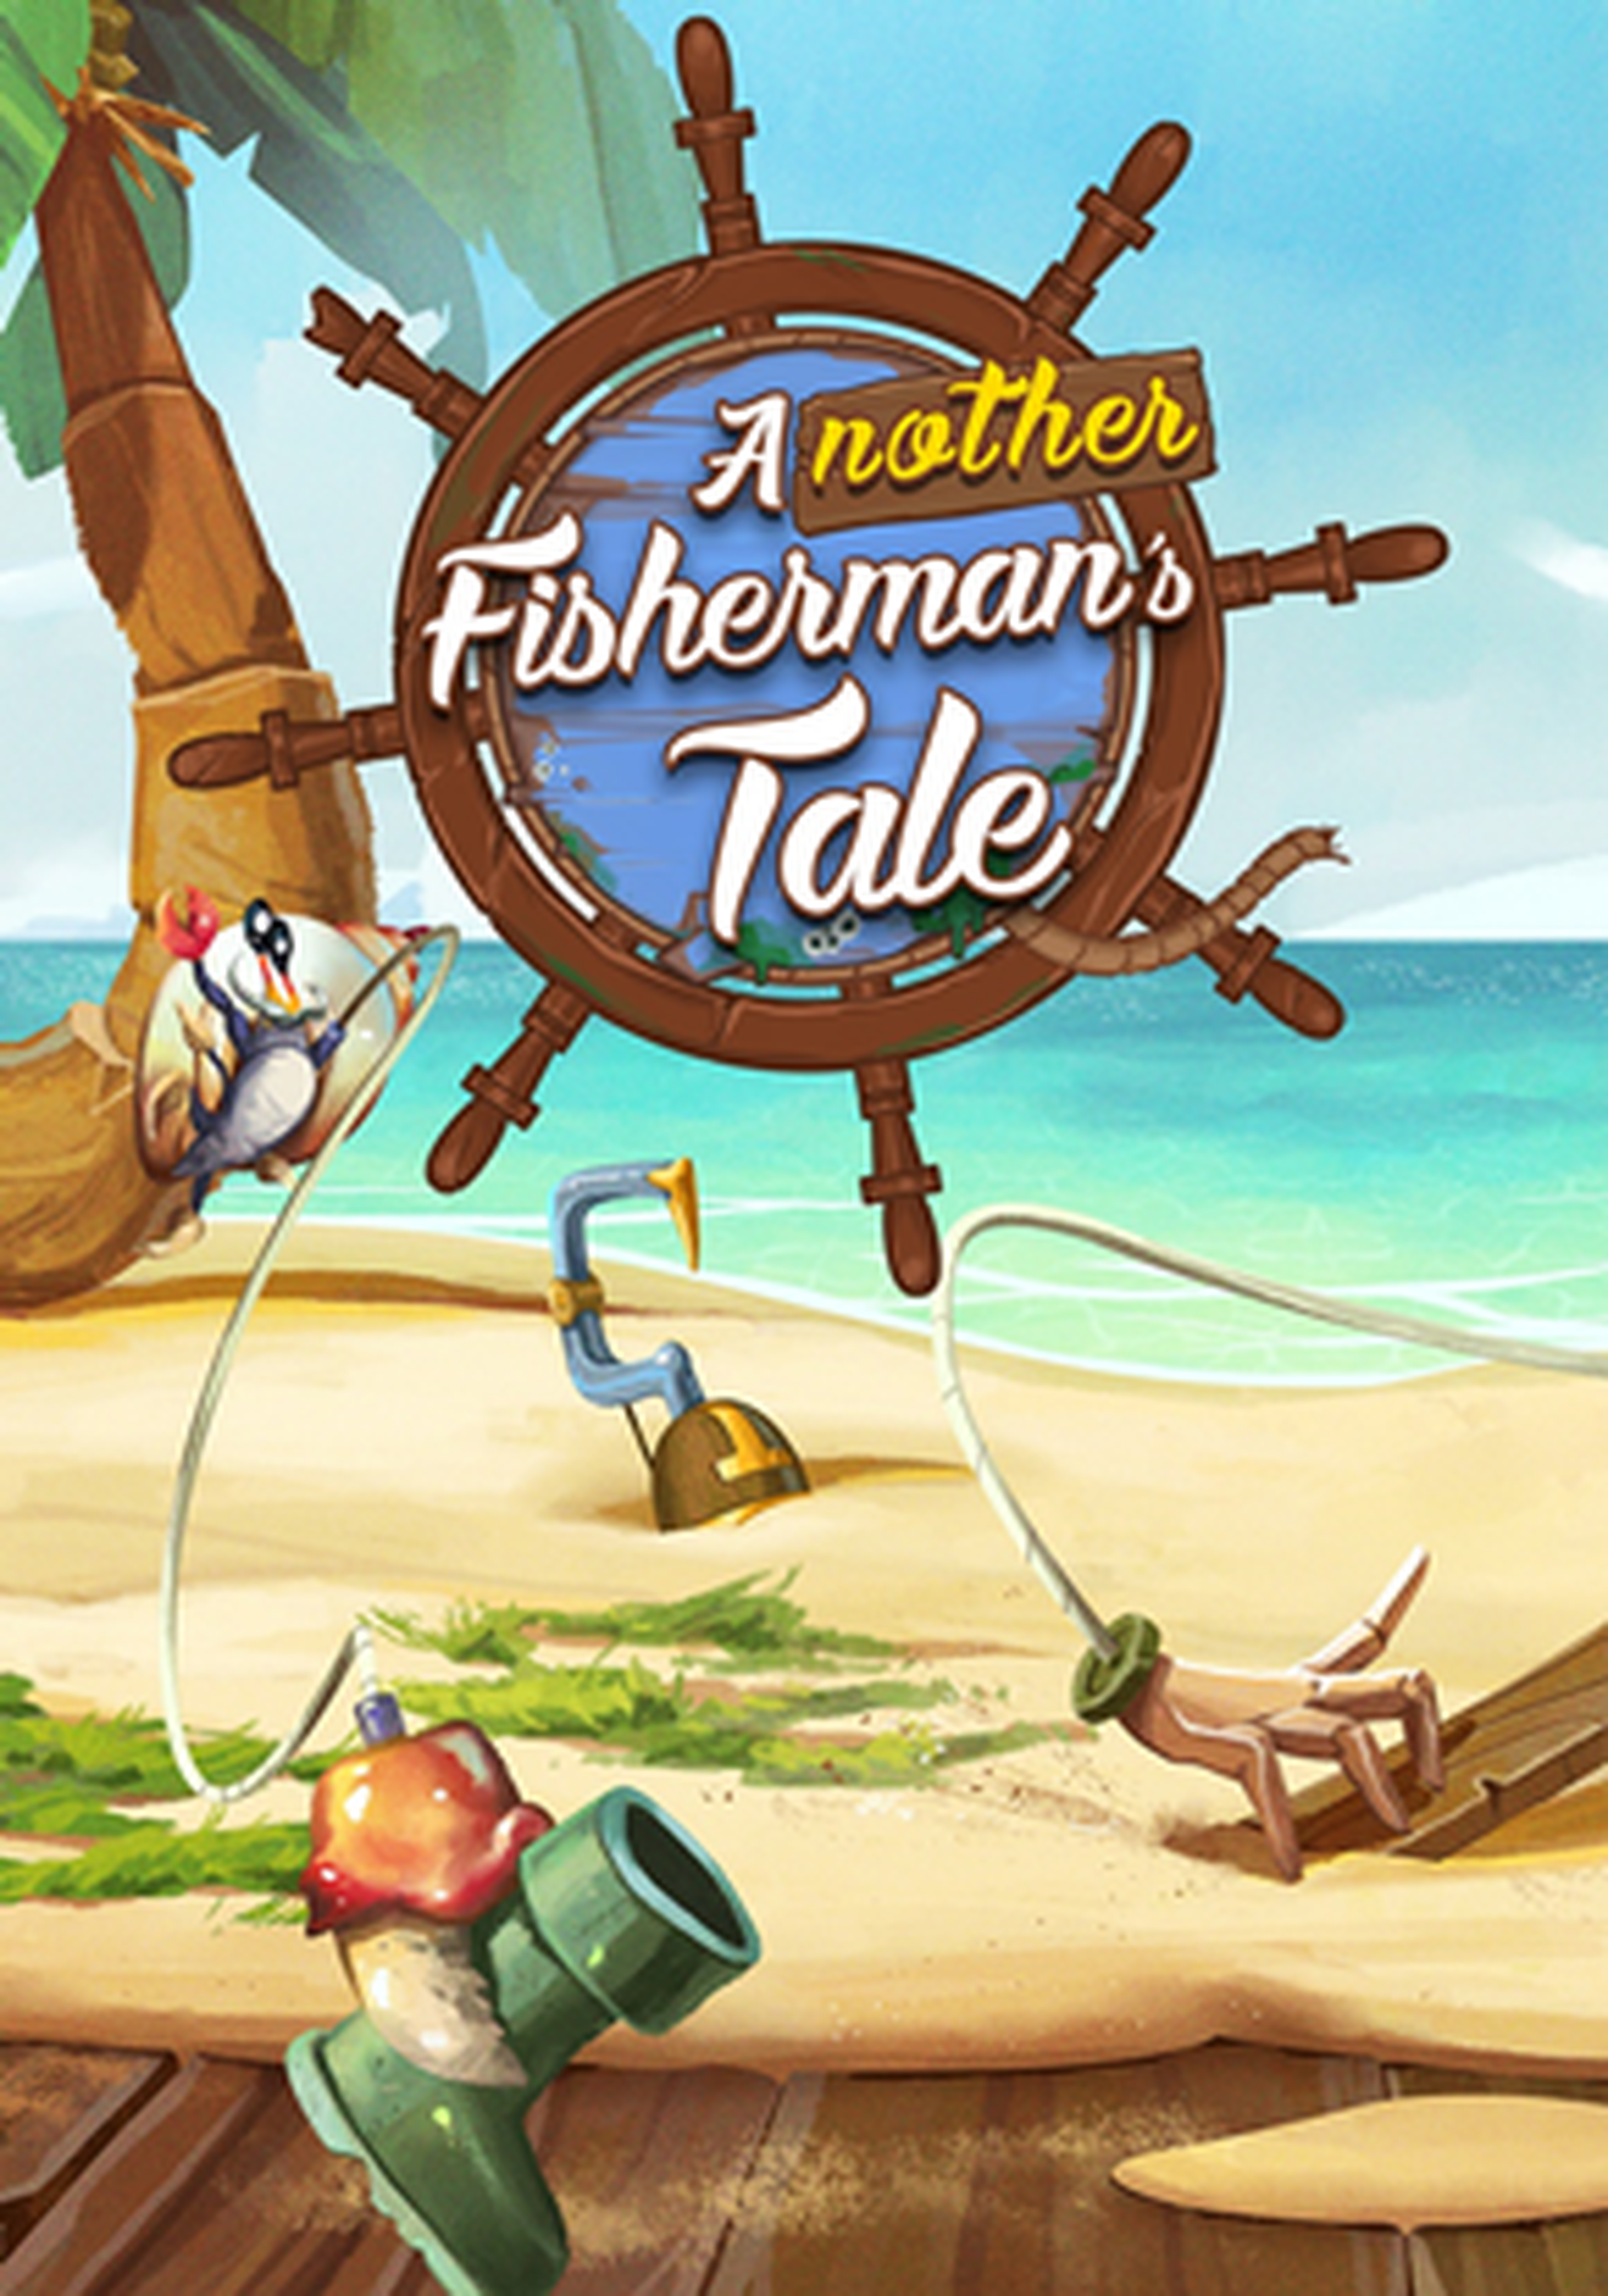 Another Fisherman's Tale cartel